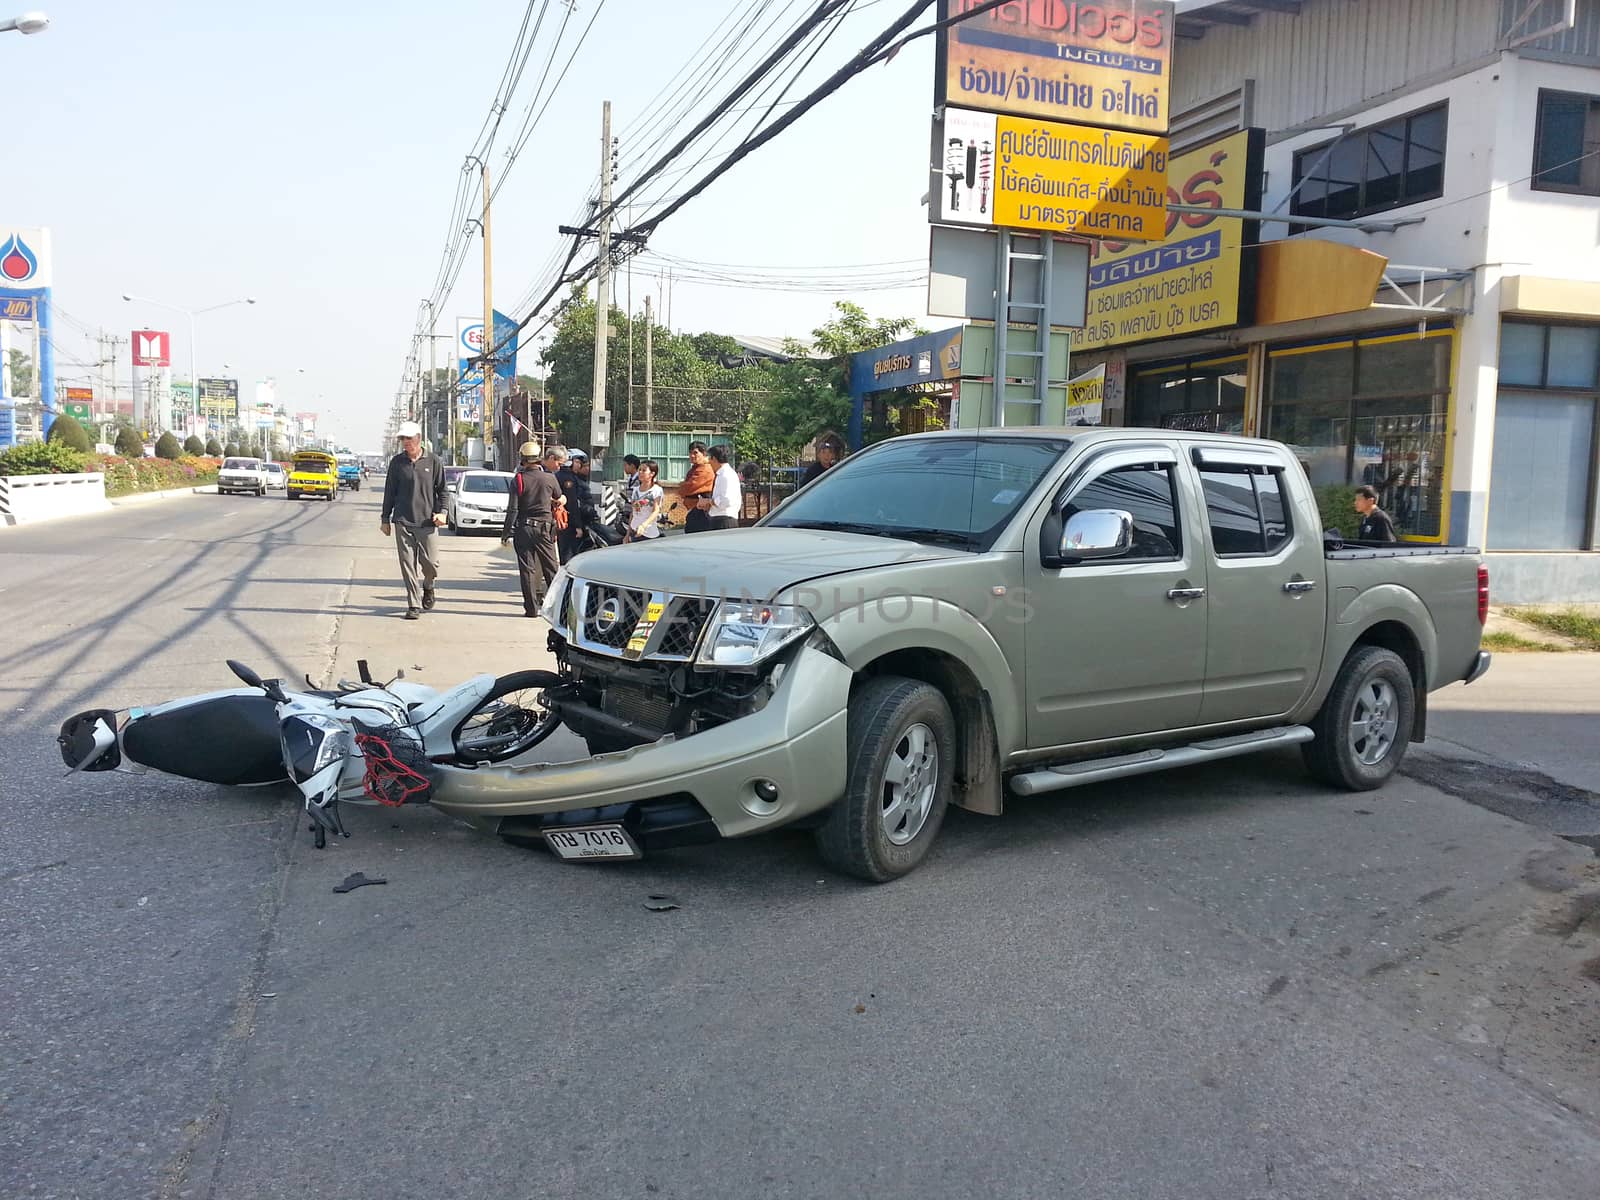 Crash Accident Pickup Truck And Motorcycle by mranucha